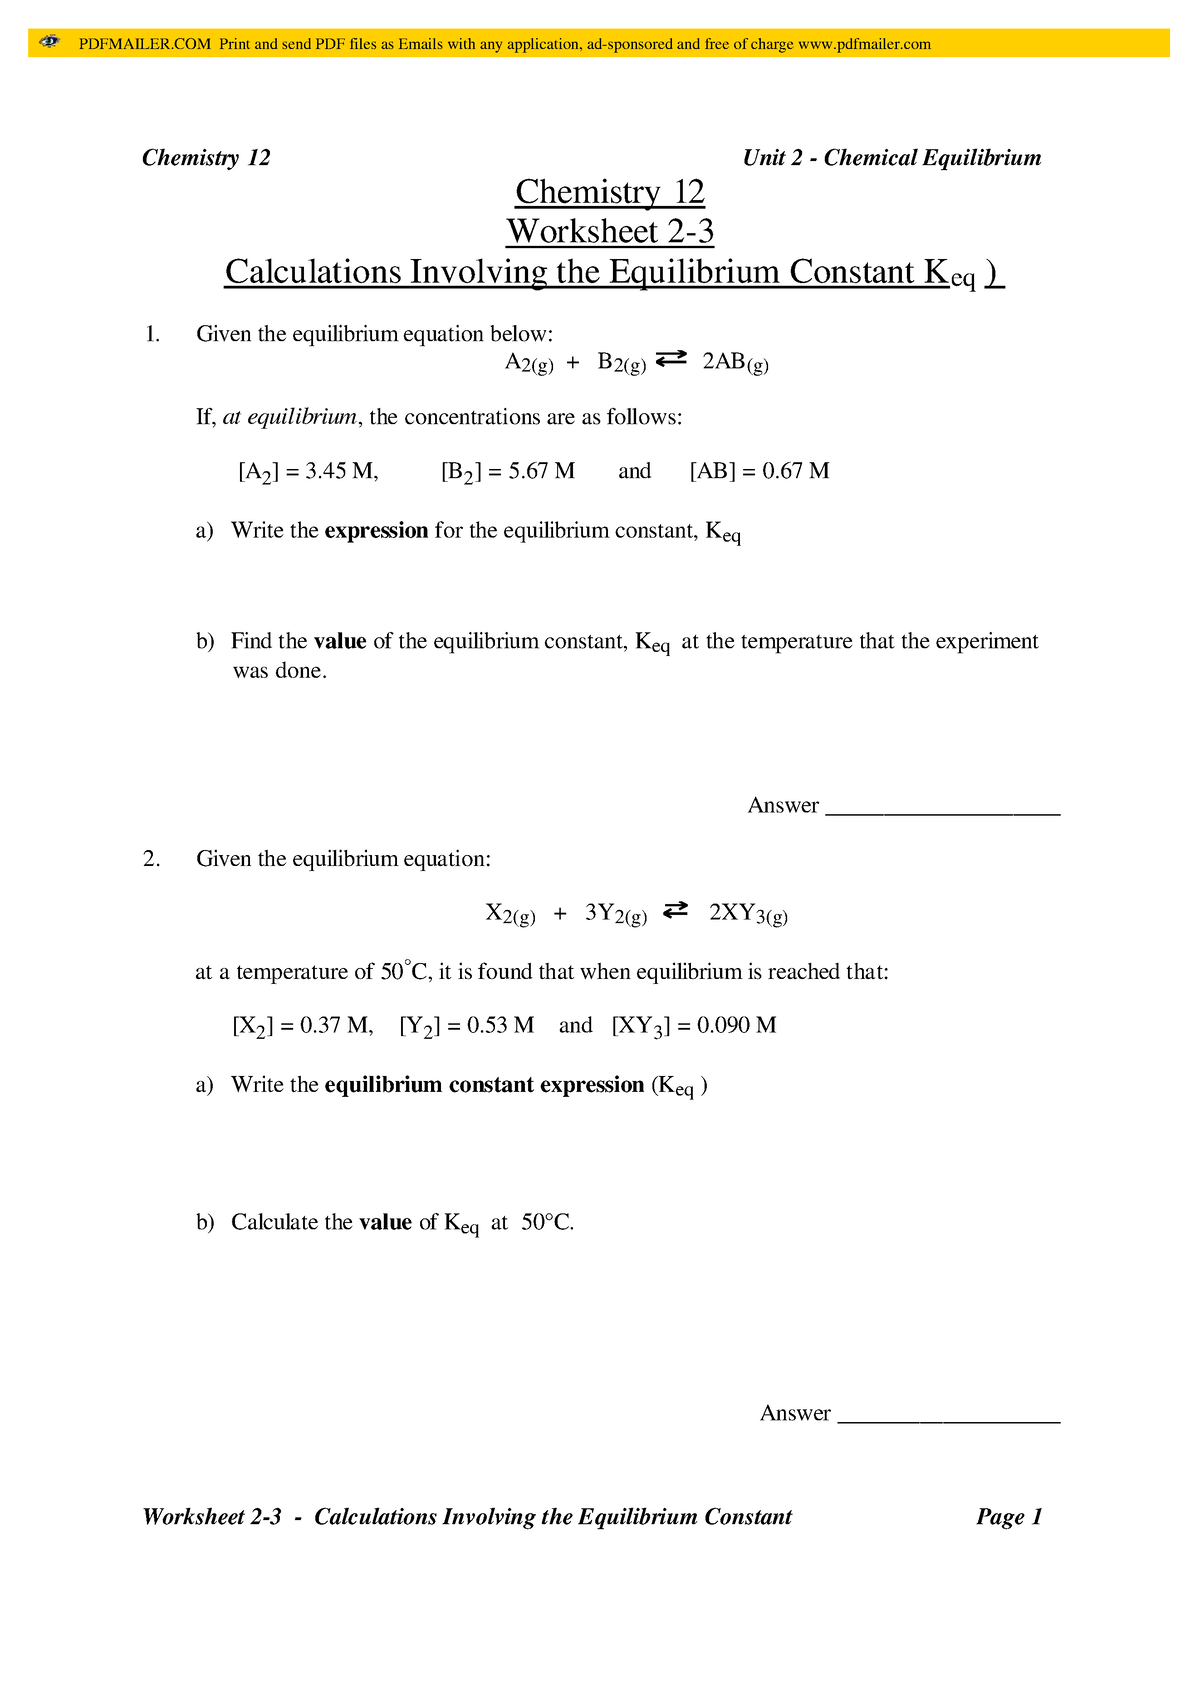 Keq Worksheet nies i w 1 Given the equilibrium equation below: 2